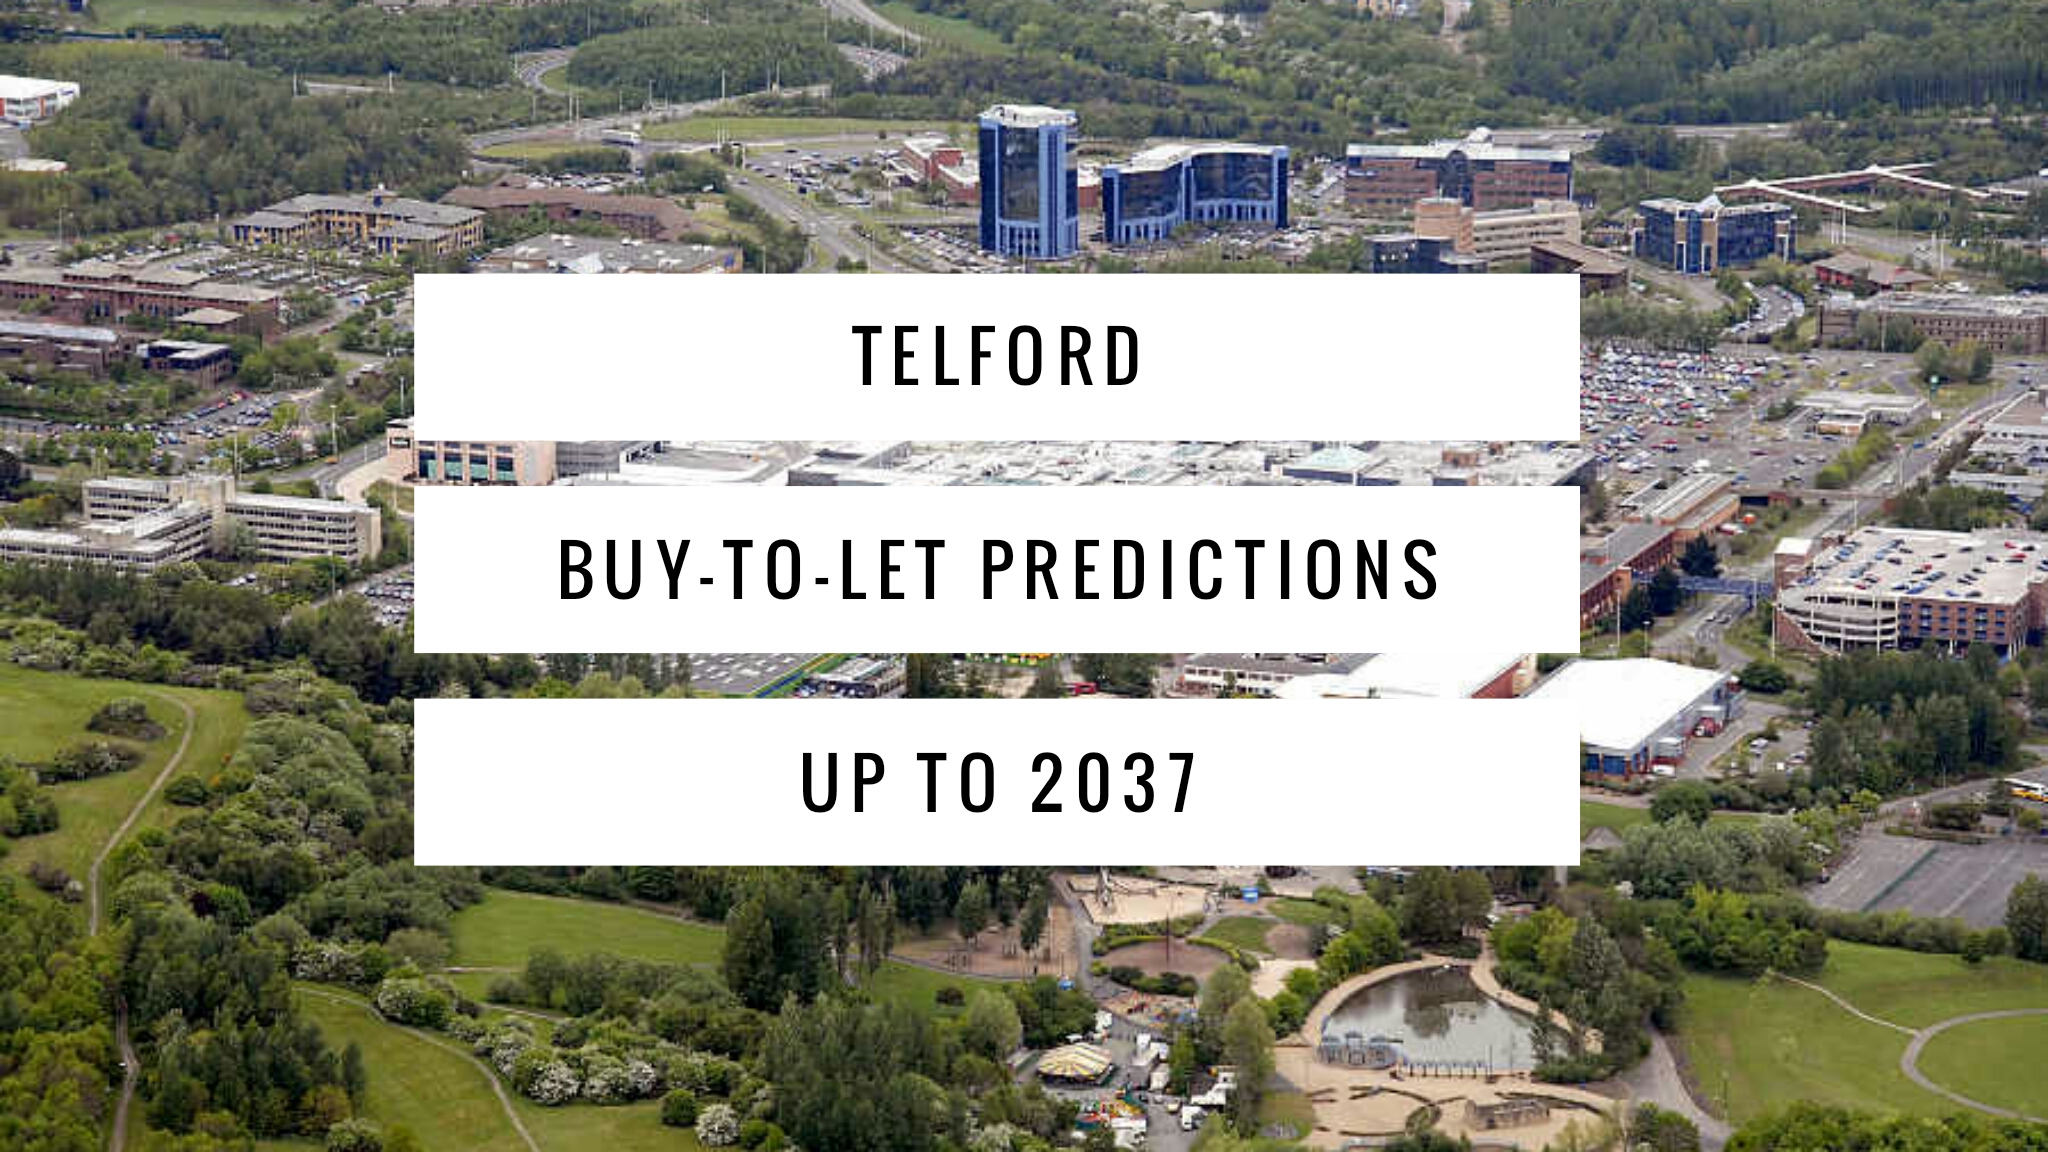 Telford Buy-To-Let Predictions up to 2037